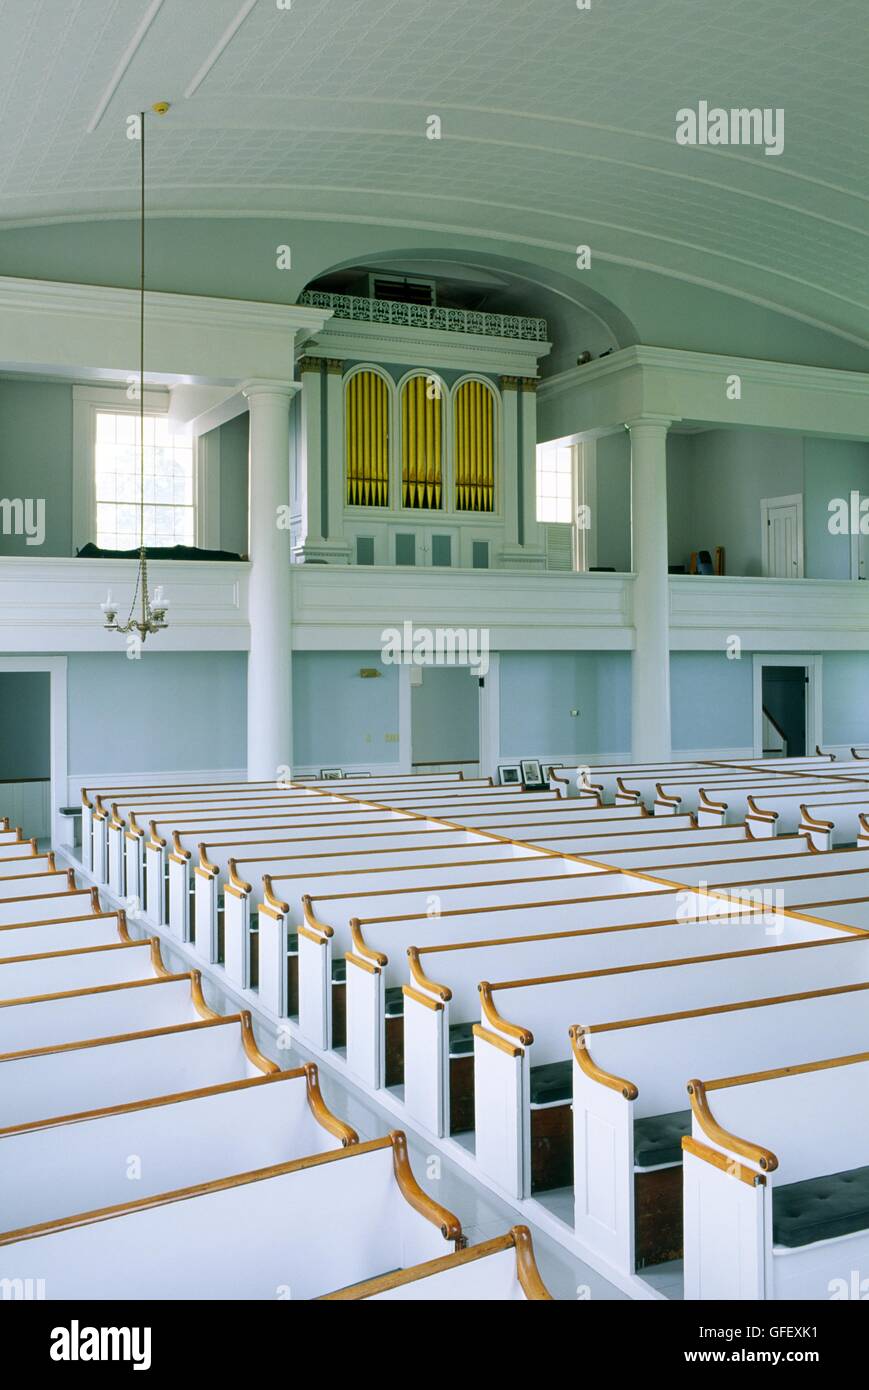 Interior of the Old Whalers Church in Edgartown on the island of Martha's Vineyard off Cape Cod, Massachusetts, New England, USA Stock Photo